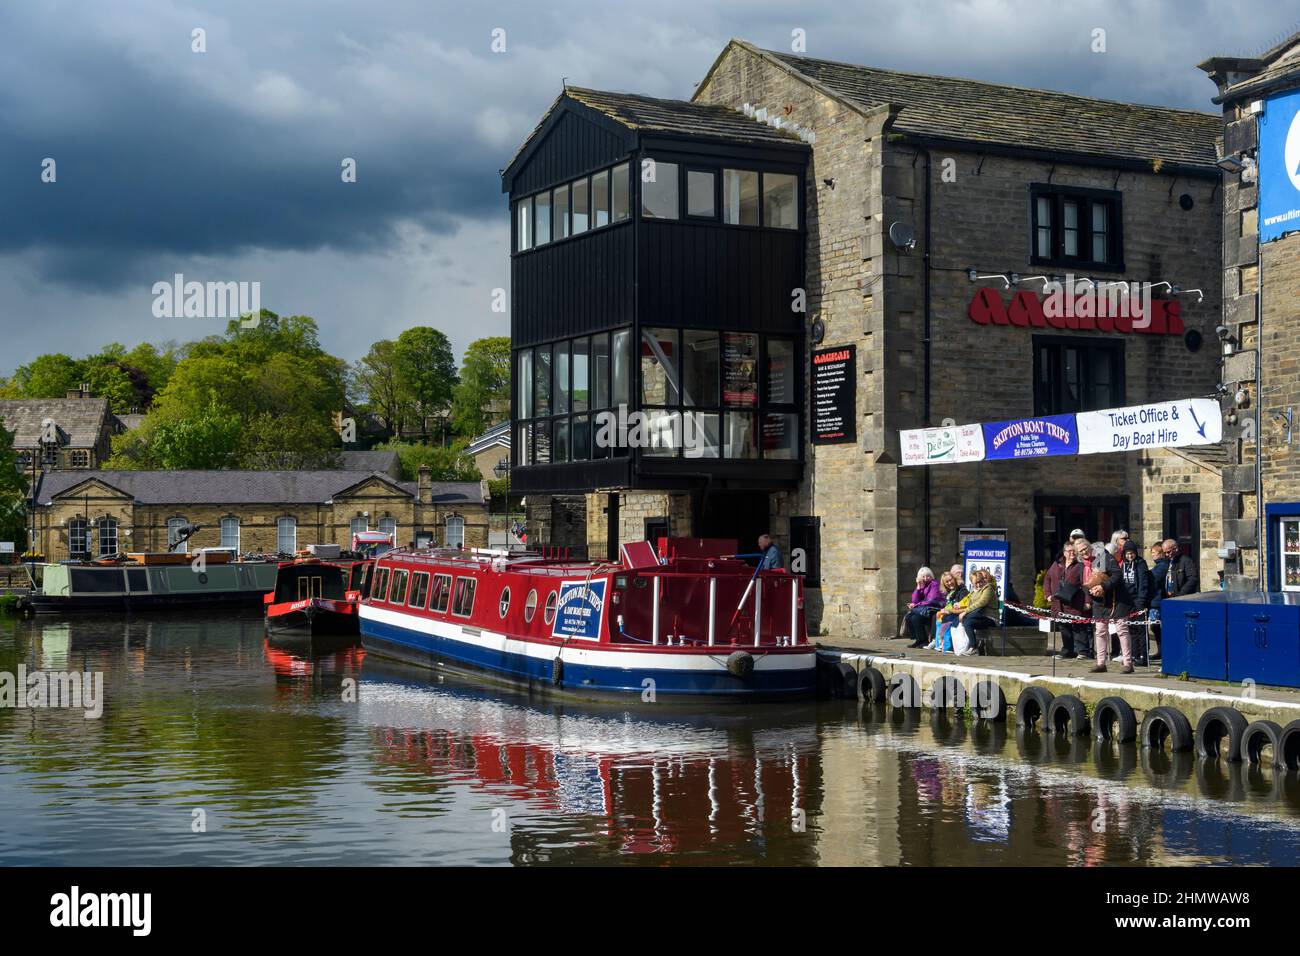 Men women queue for tourist leisure experience on red narrow boat (ticket office, canalside moorings) - Leeds-Liverpool Canal, Yorkshire, England UK. Stock Photo